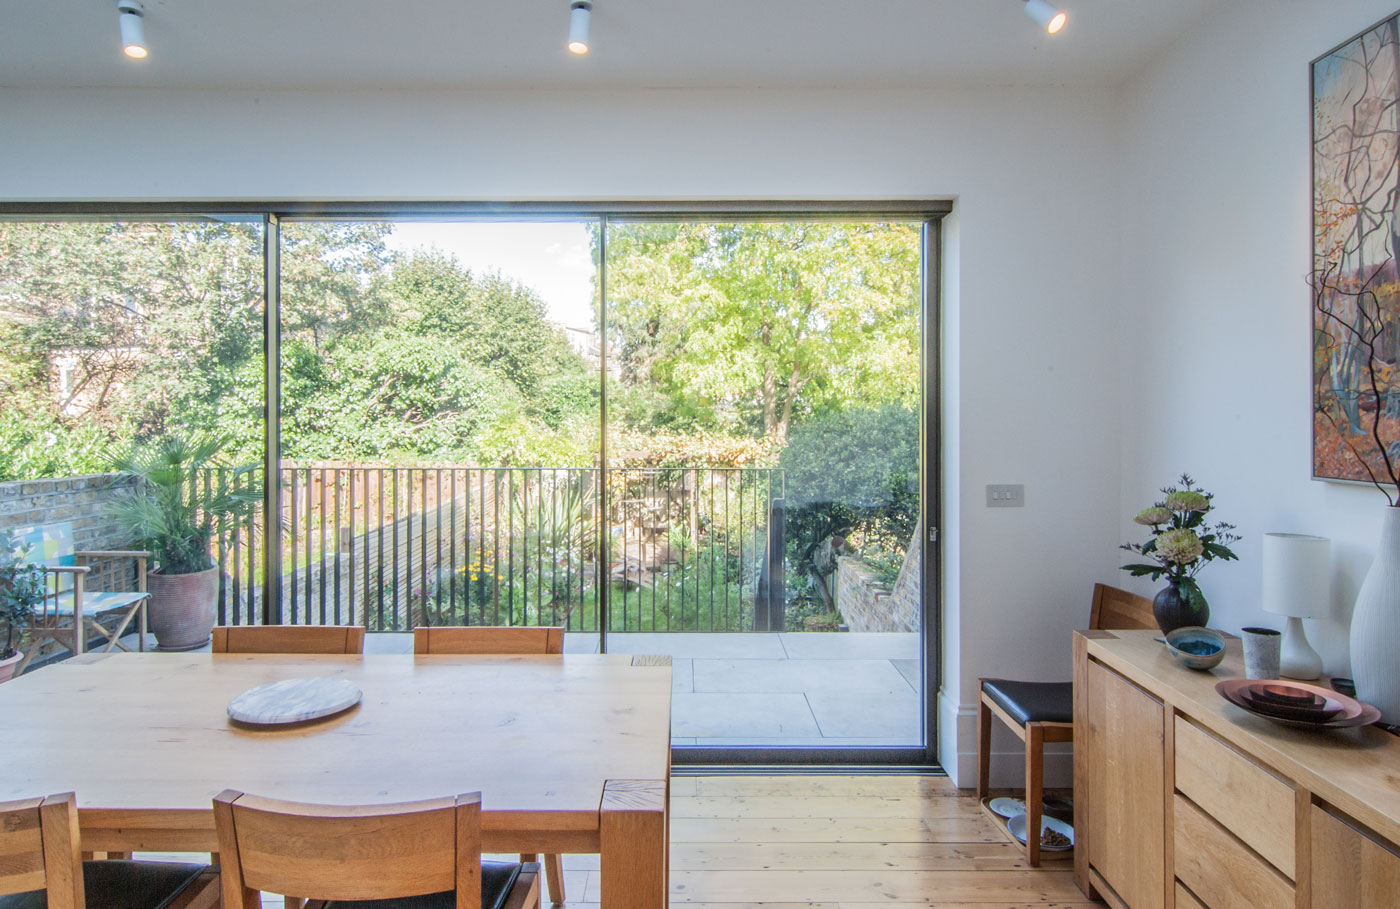 woodworker studio and house extension renovation london